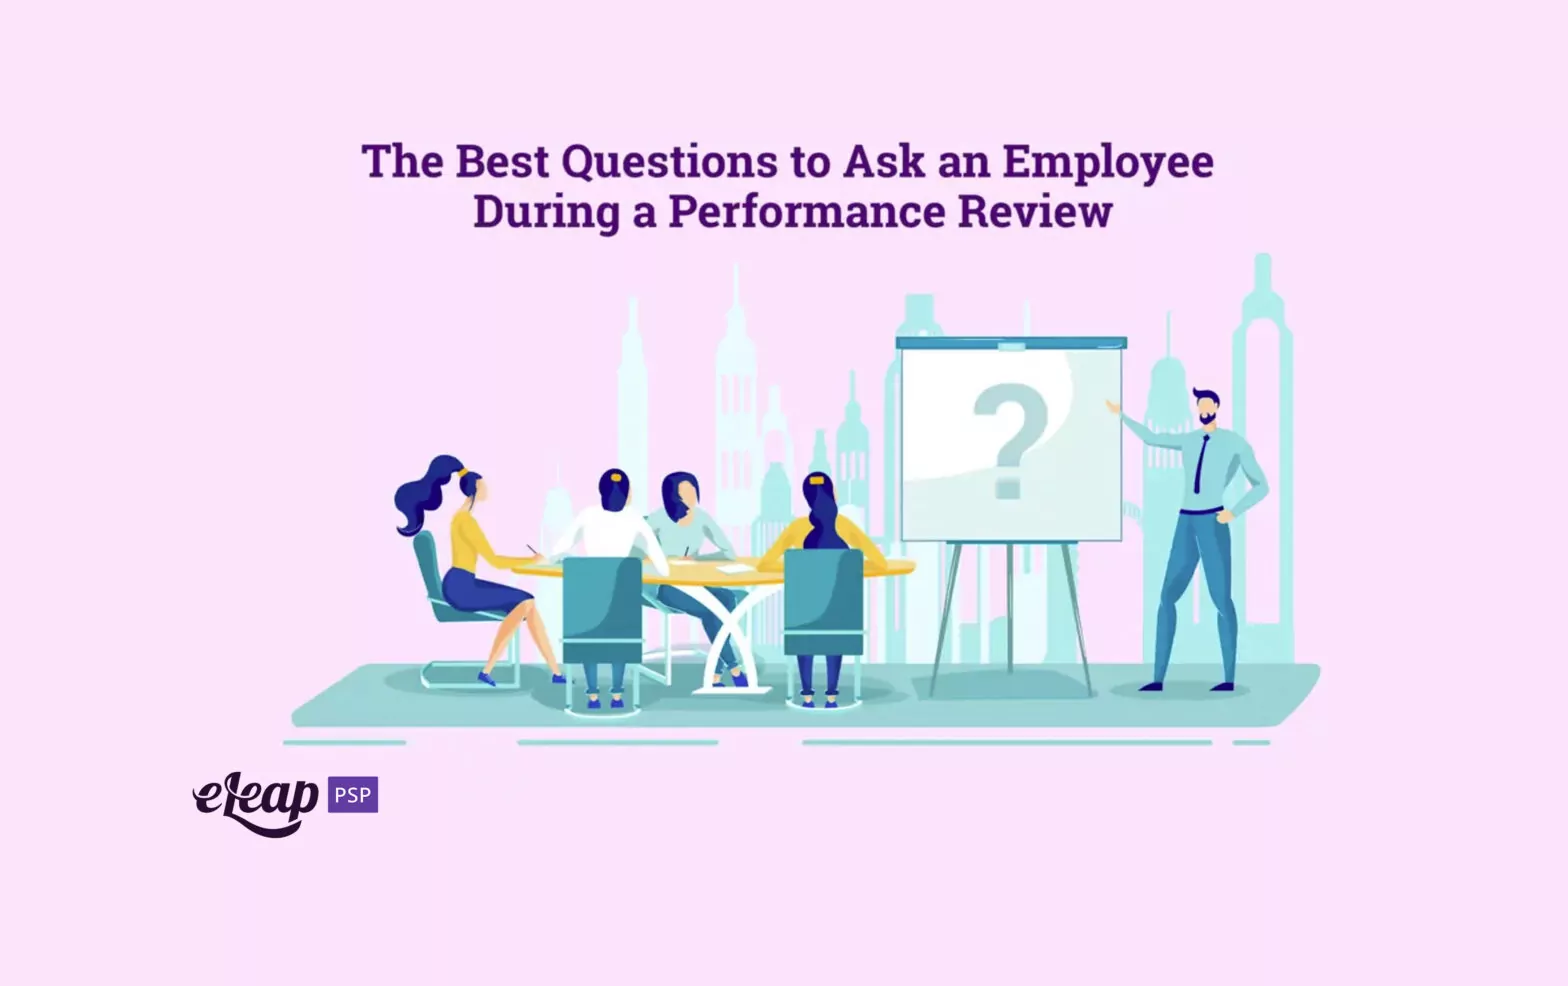 The Best Questions to Ask an Employee During a Performance Review